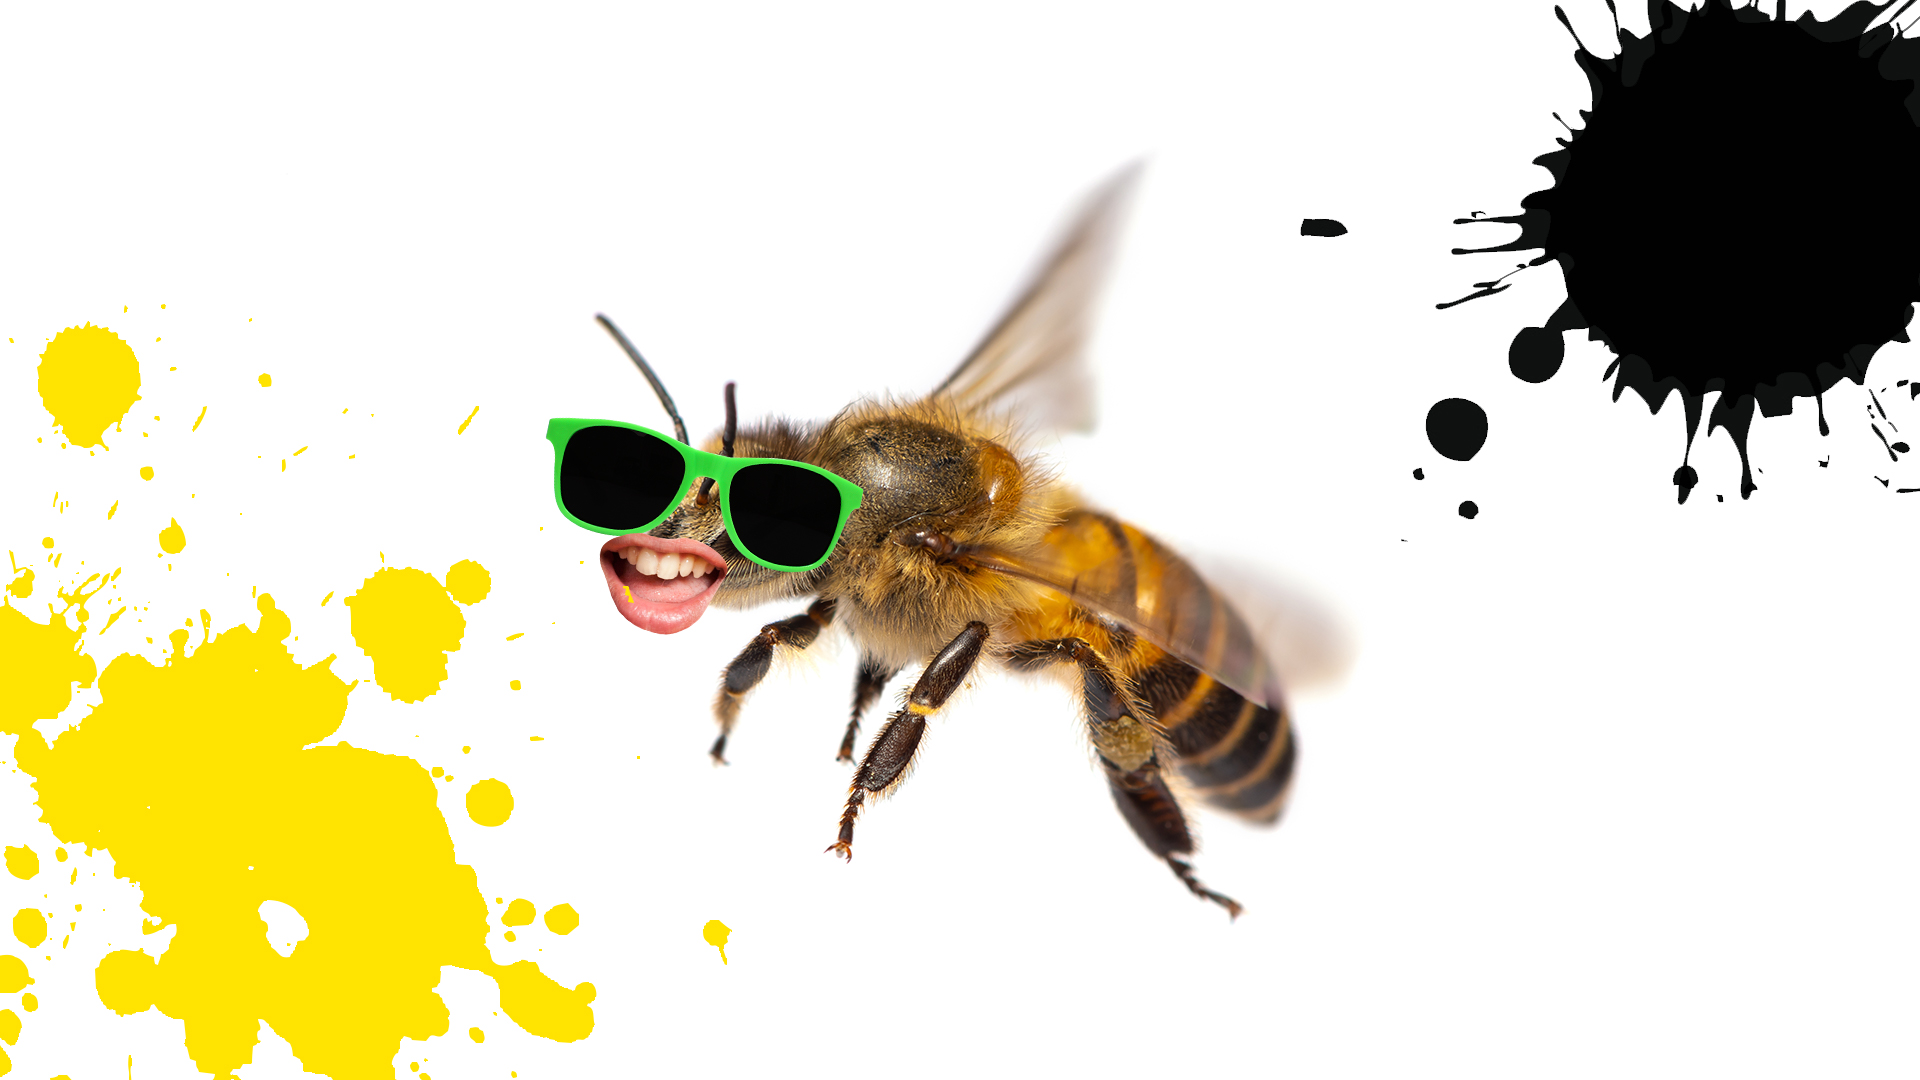 A grinning bee wearing green sunglasses